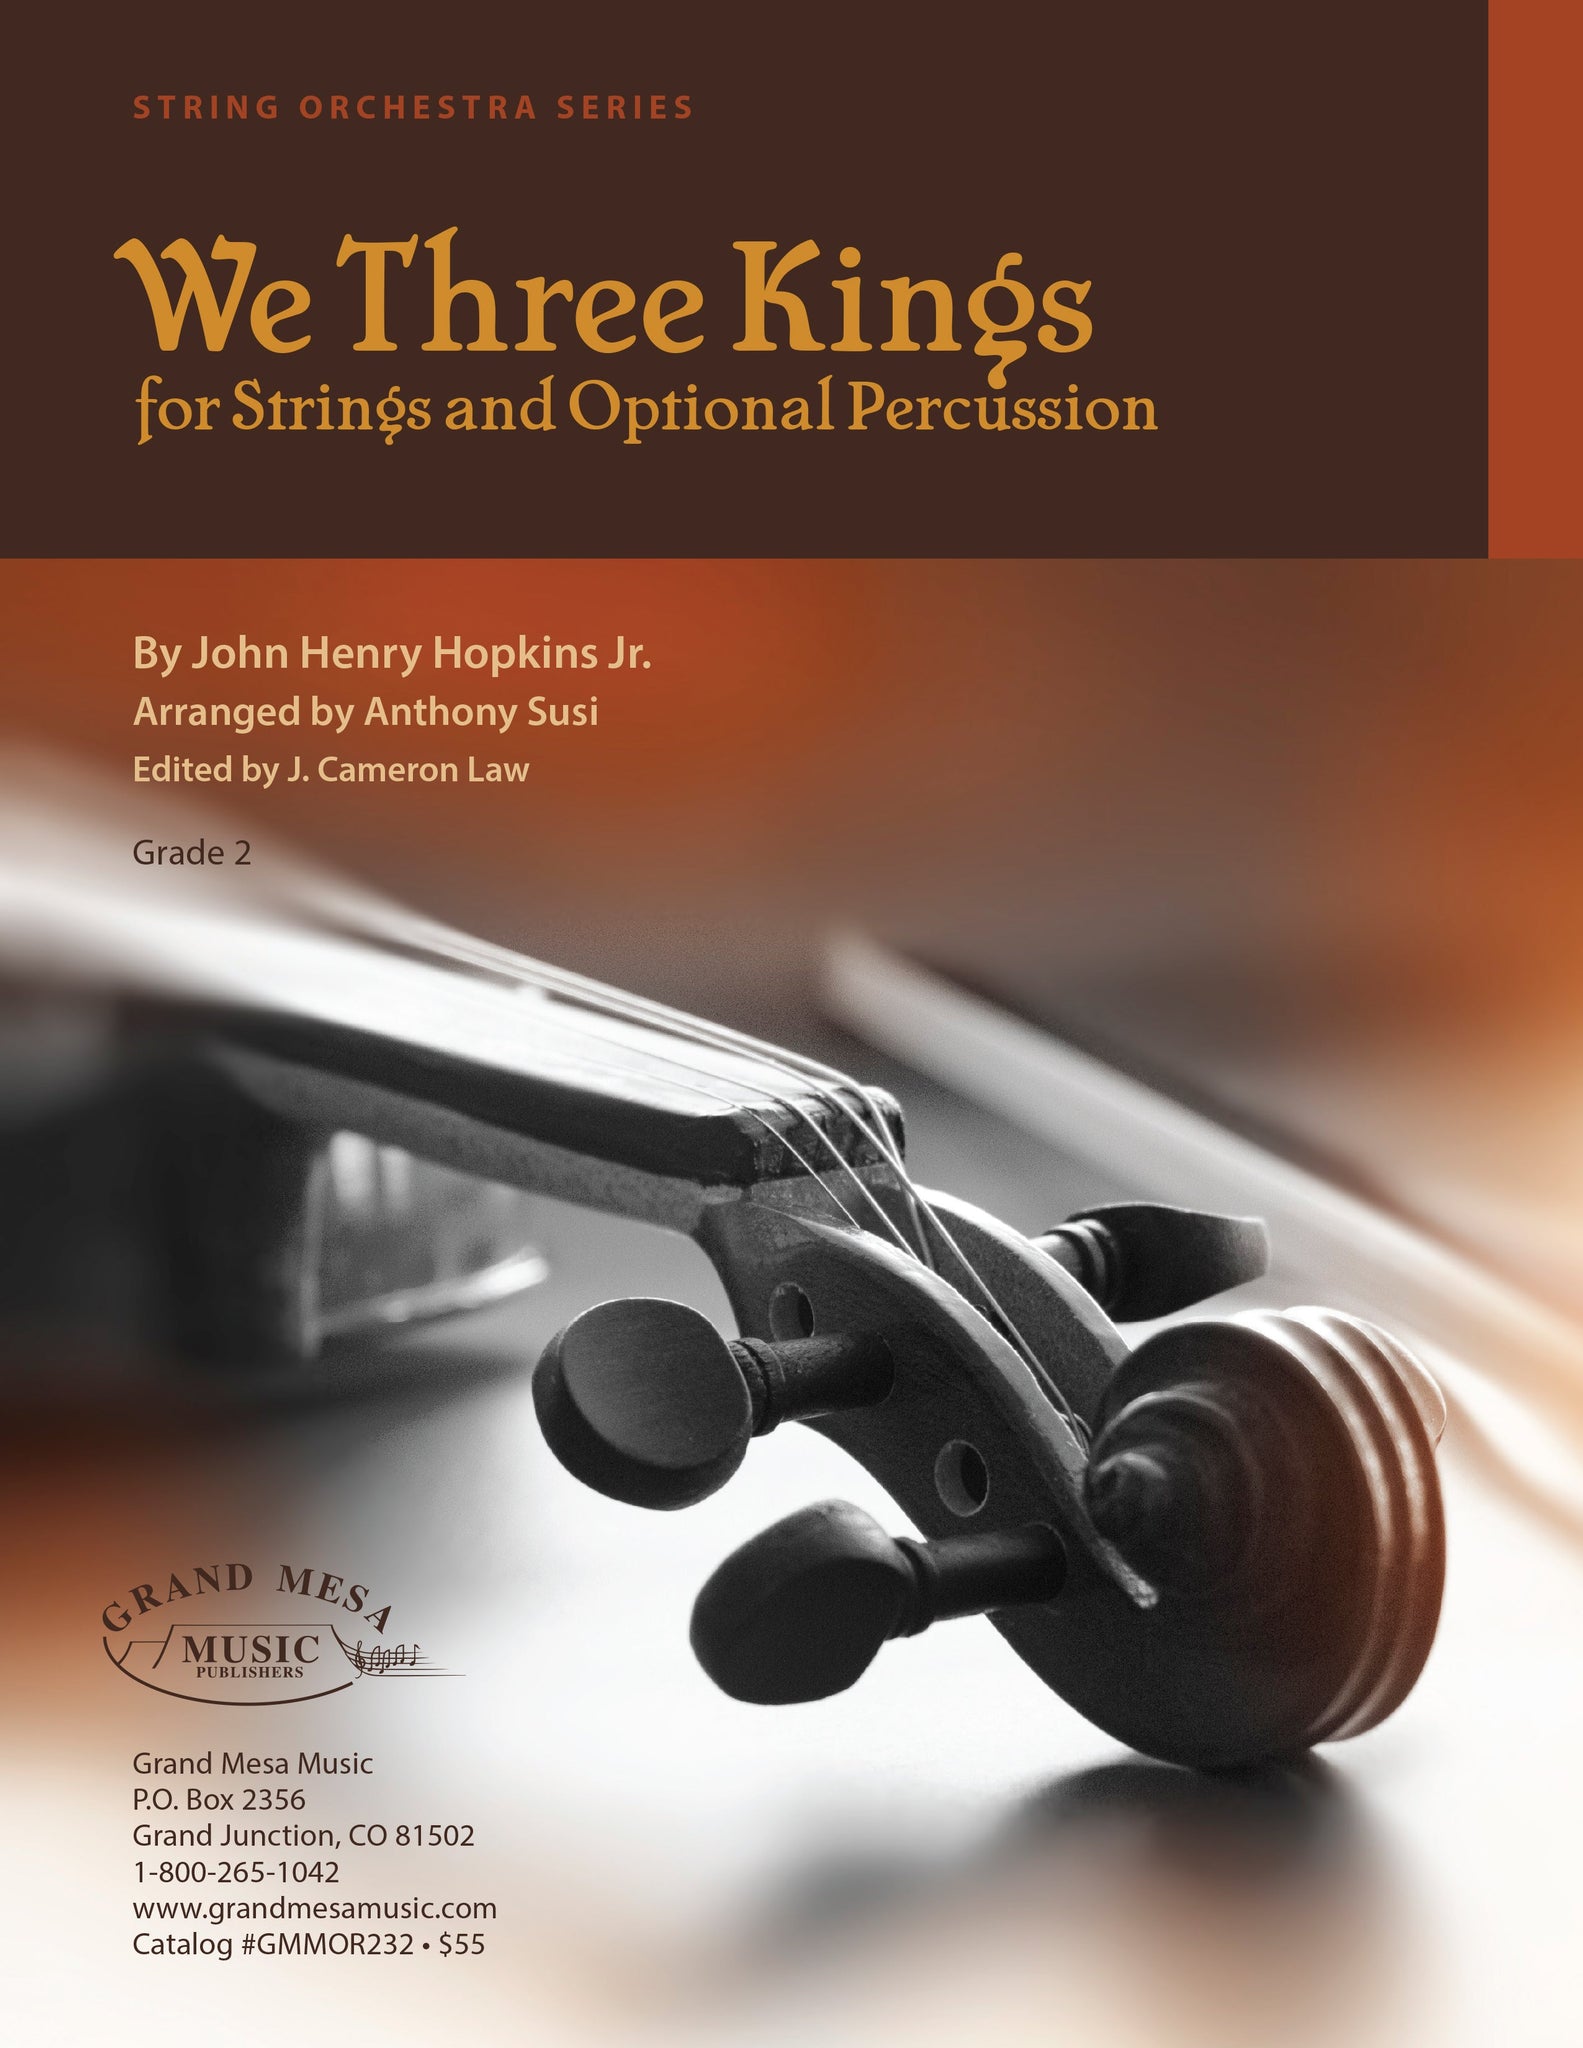 Strings sheet music cover of We Three Kings, composed by John Henry Hopkins, arranged by Anthony Susi.